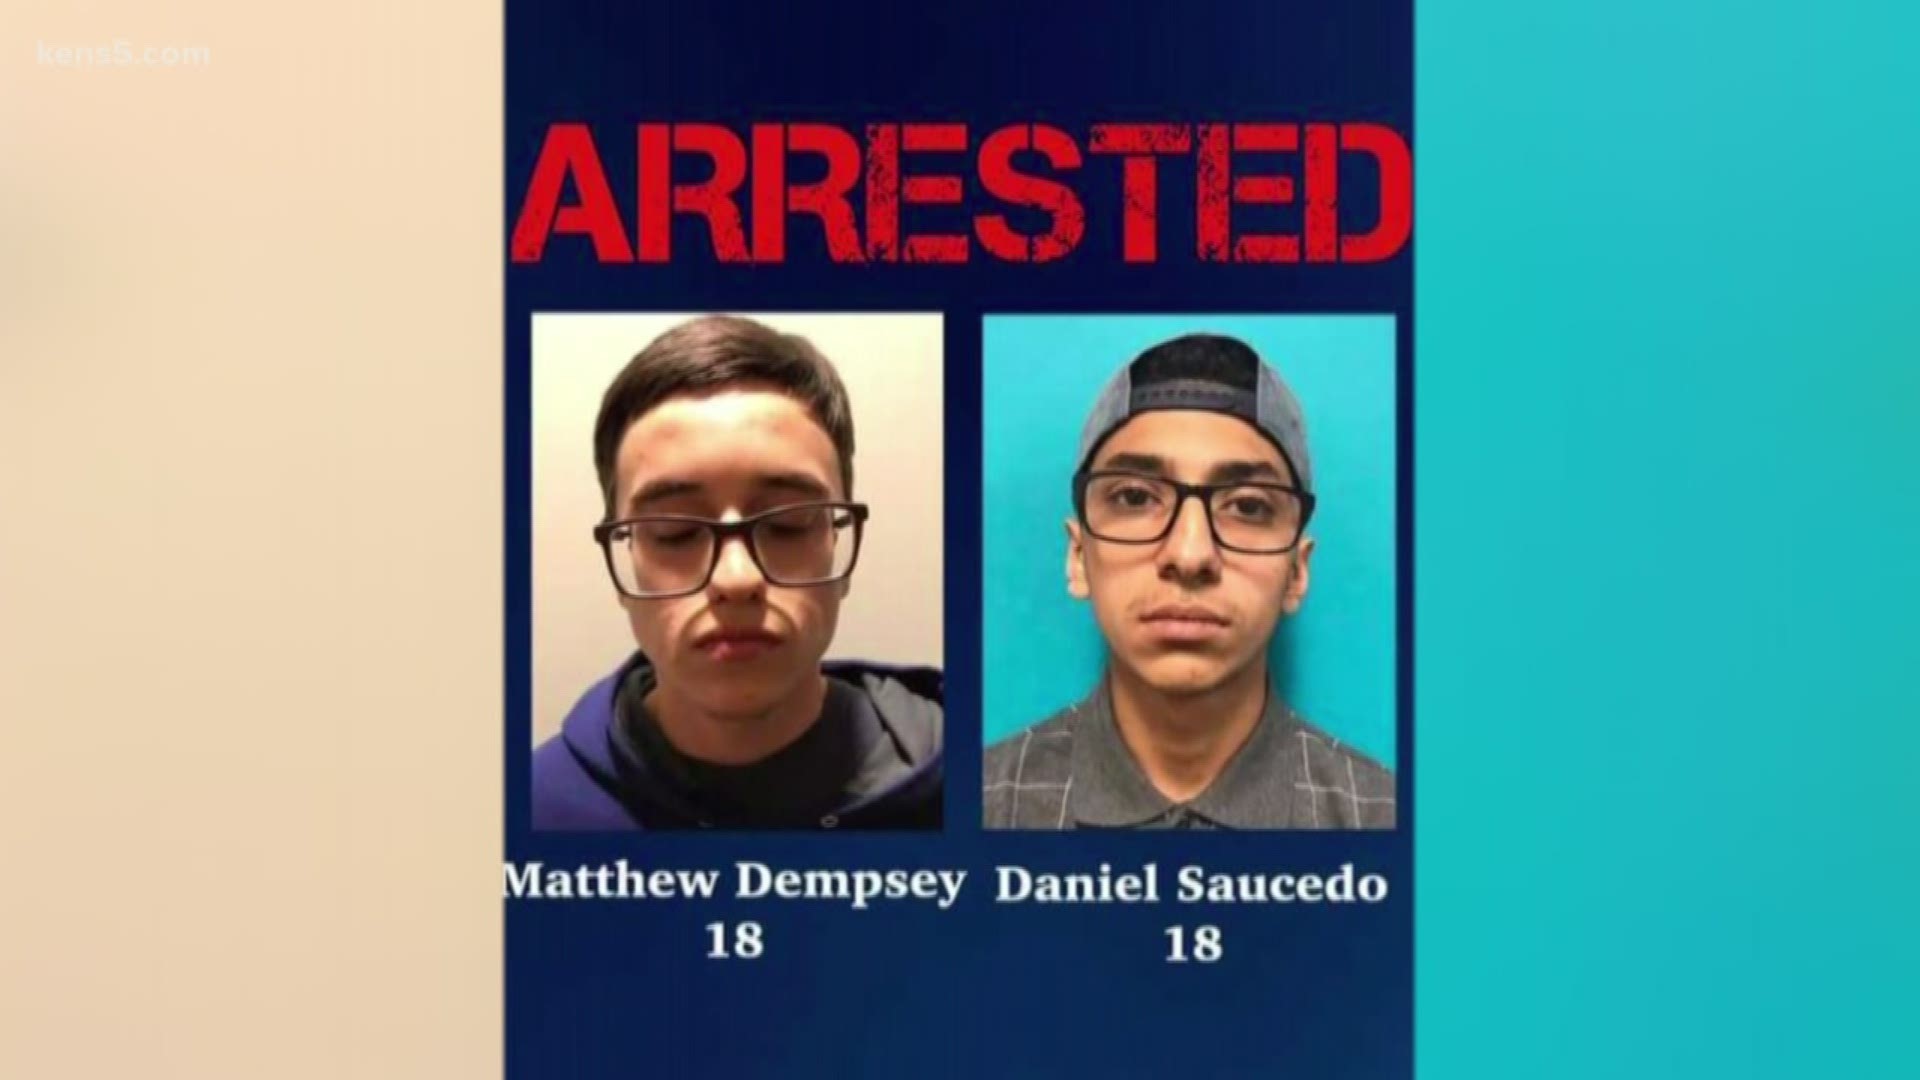 According to court records, Mary Dempsey's son, Matthew, provided a full confession admitting to robbing and killing his mother, along with Daniel Saucedo, 18. Matthew and Saucedo have been arrested and charged with the capital murder.